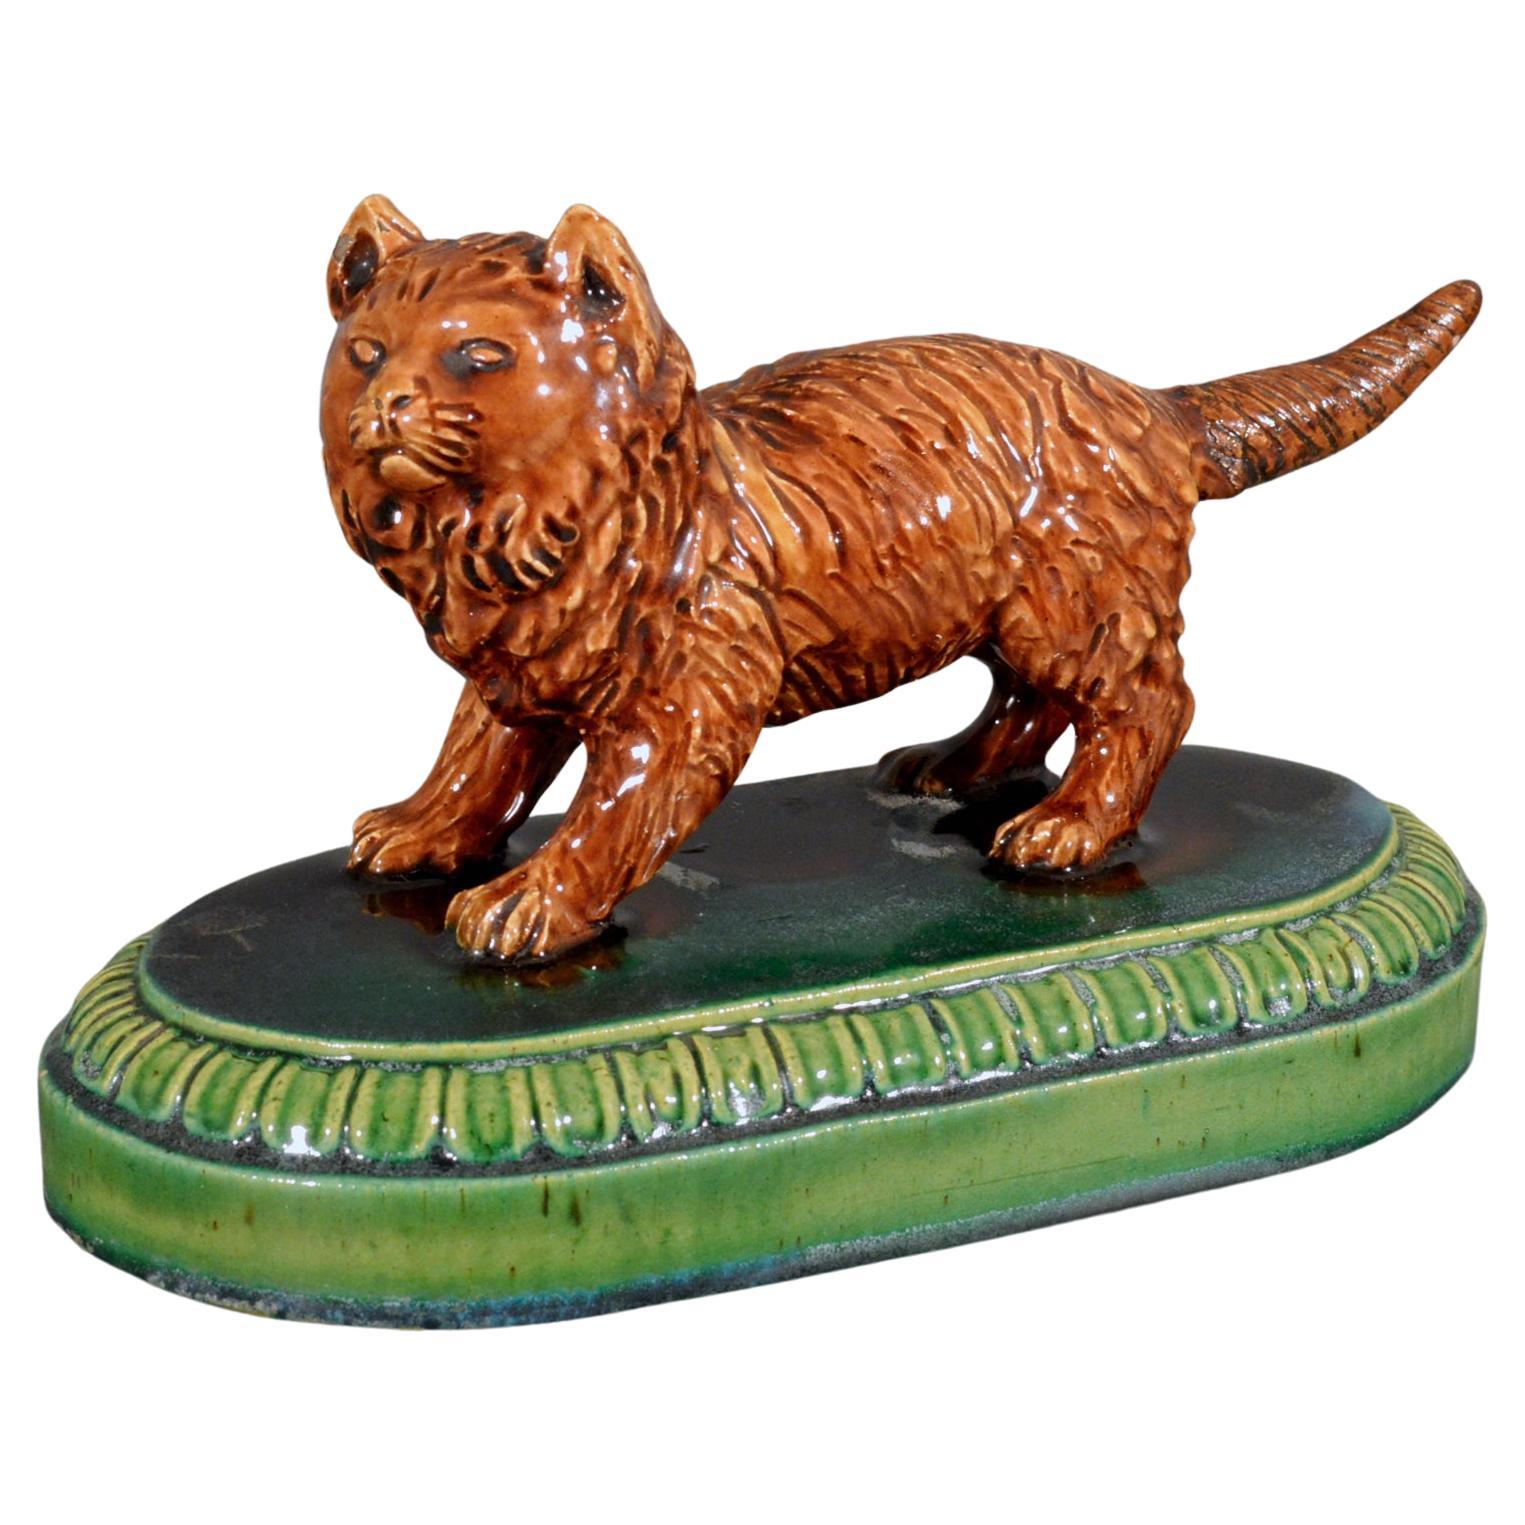 Majolica Earthenware Model of a Cat, Possibly William Brownfield